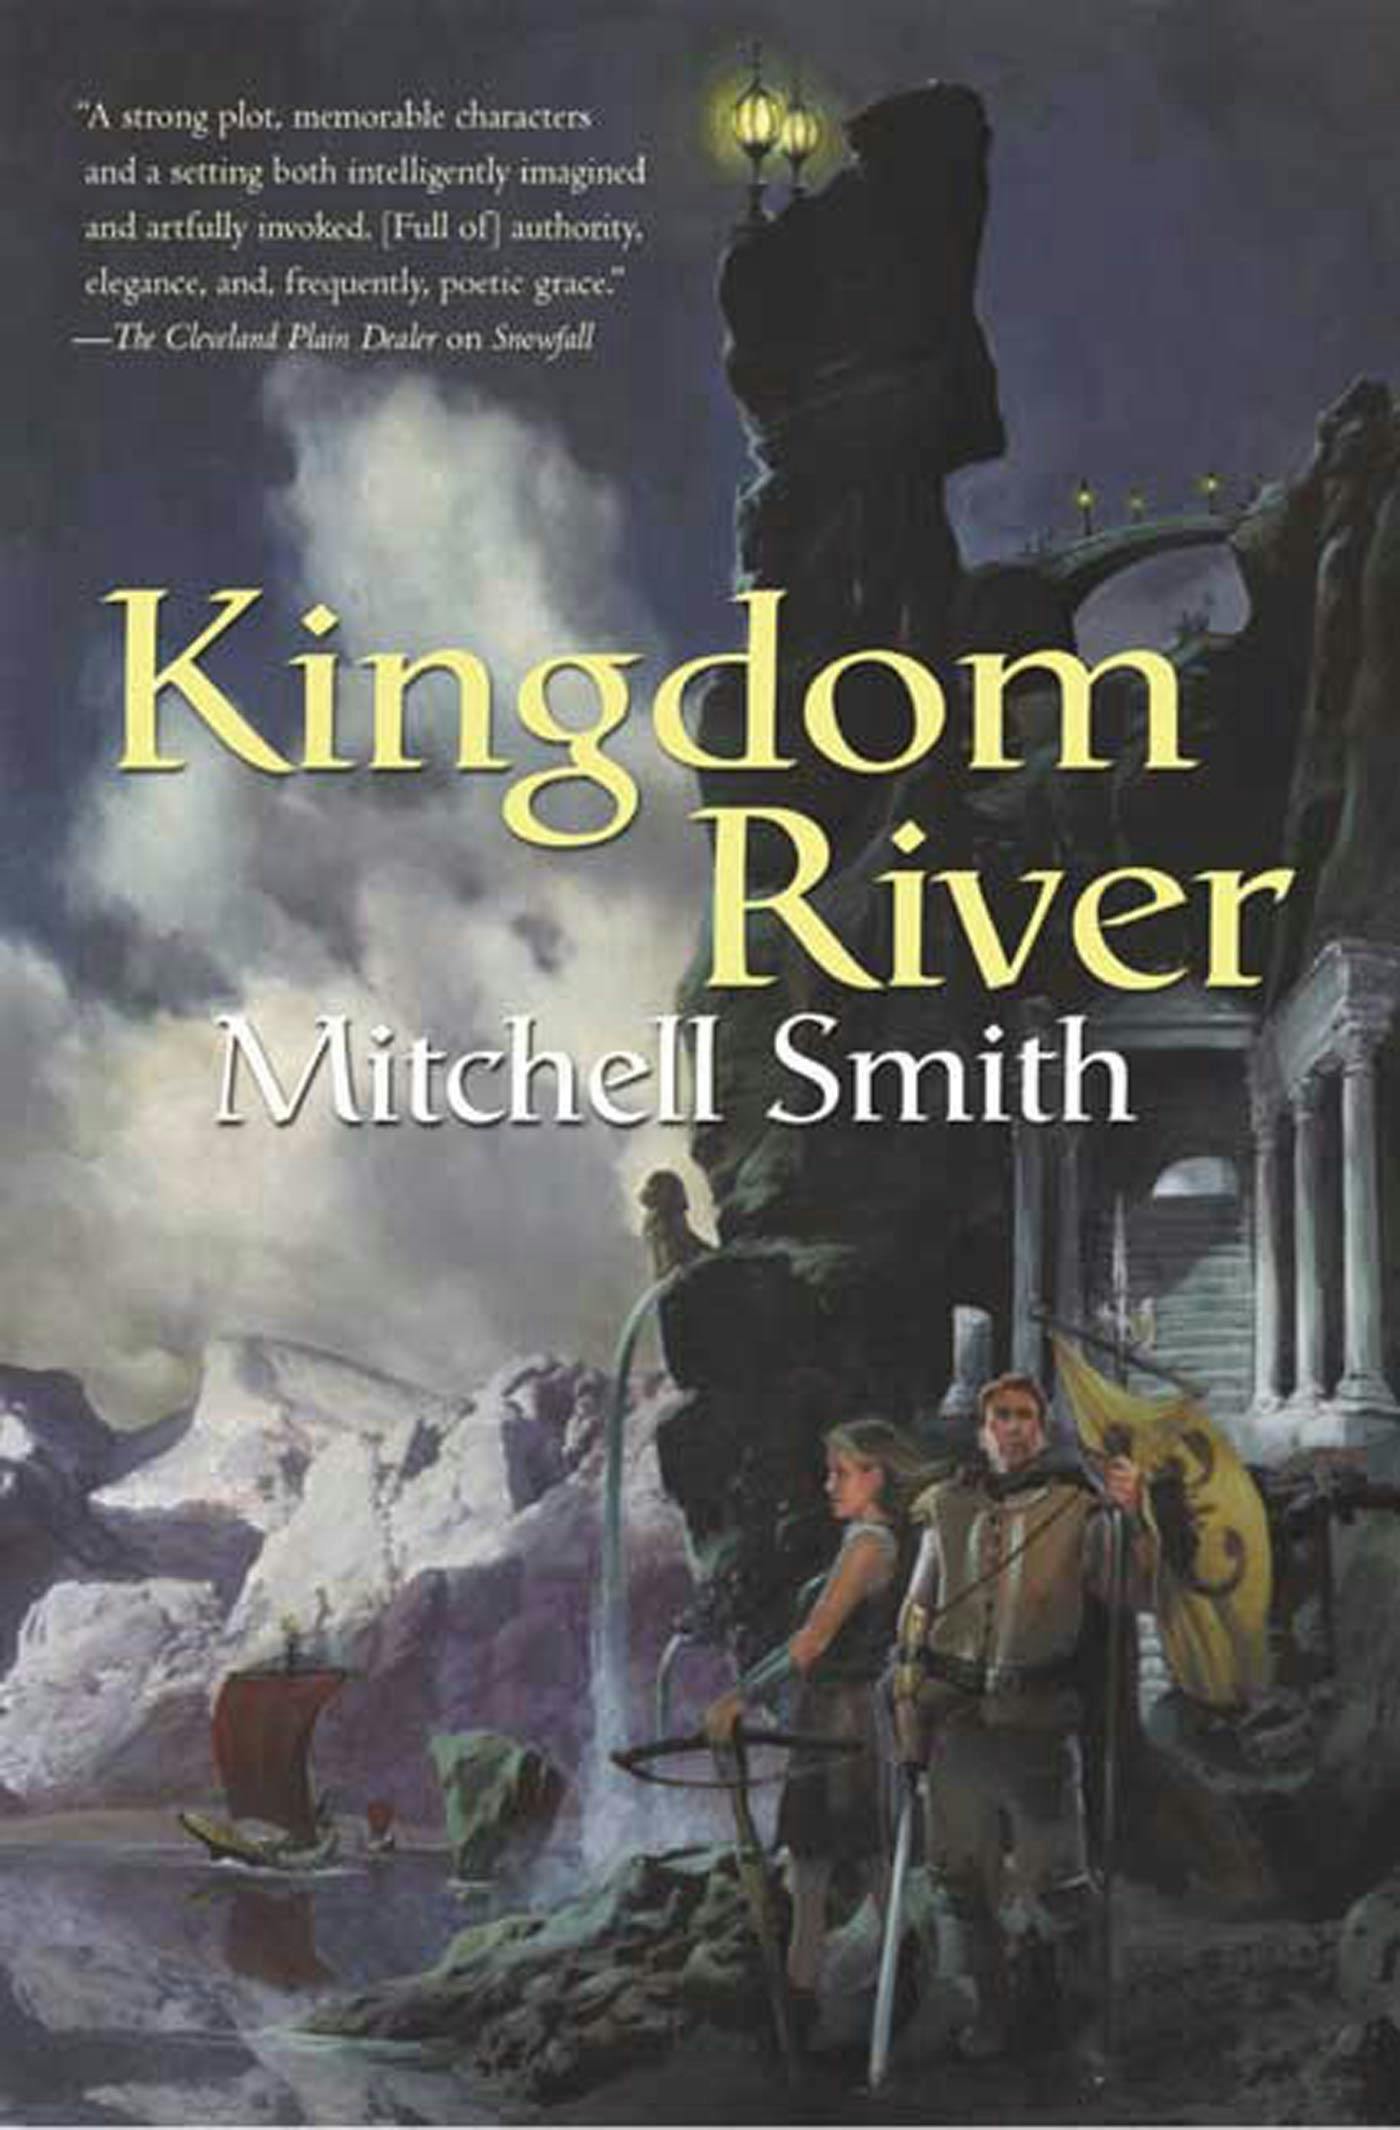 Cover for the book titled as: Kingdom River